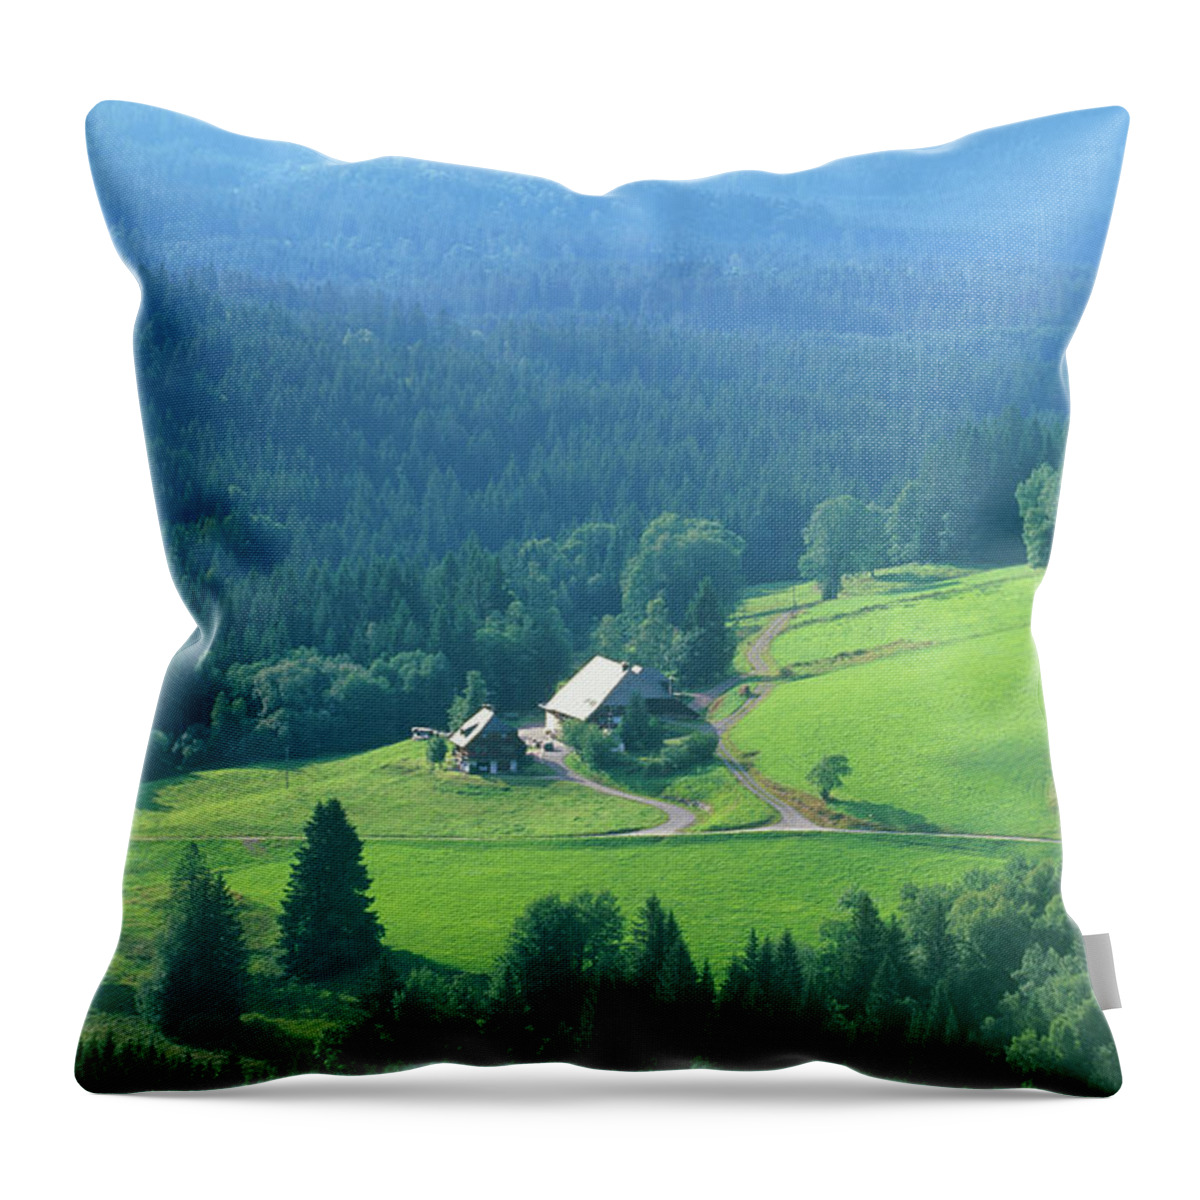 Scenics Throw Pillow featuring the photograph Farm In Black Forest by Martial Colomb